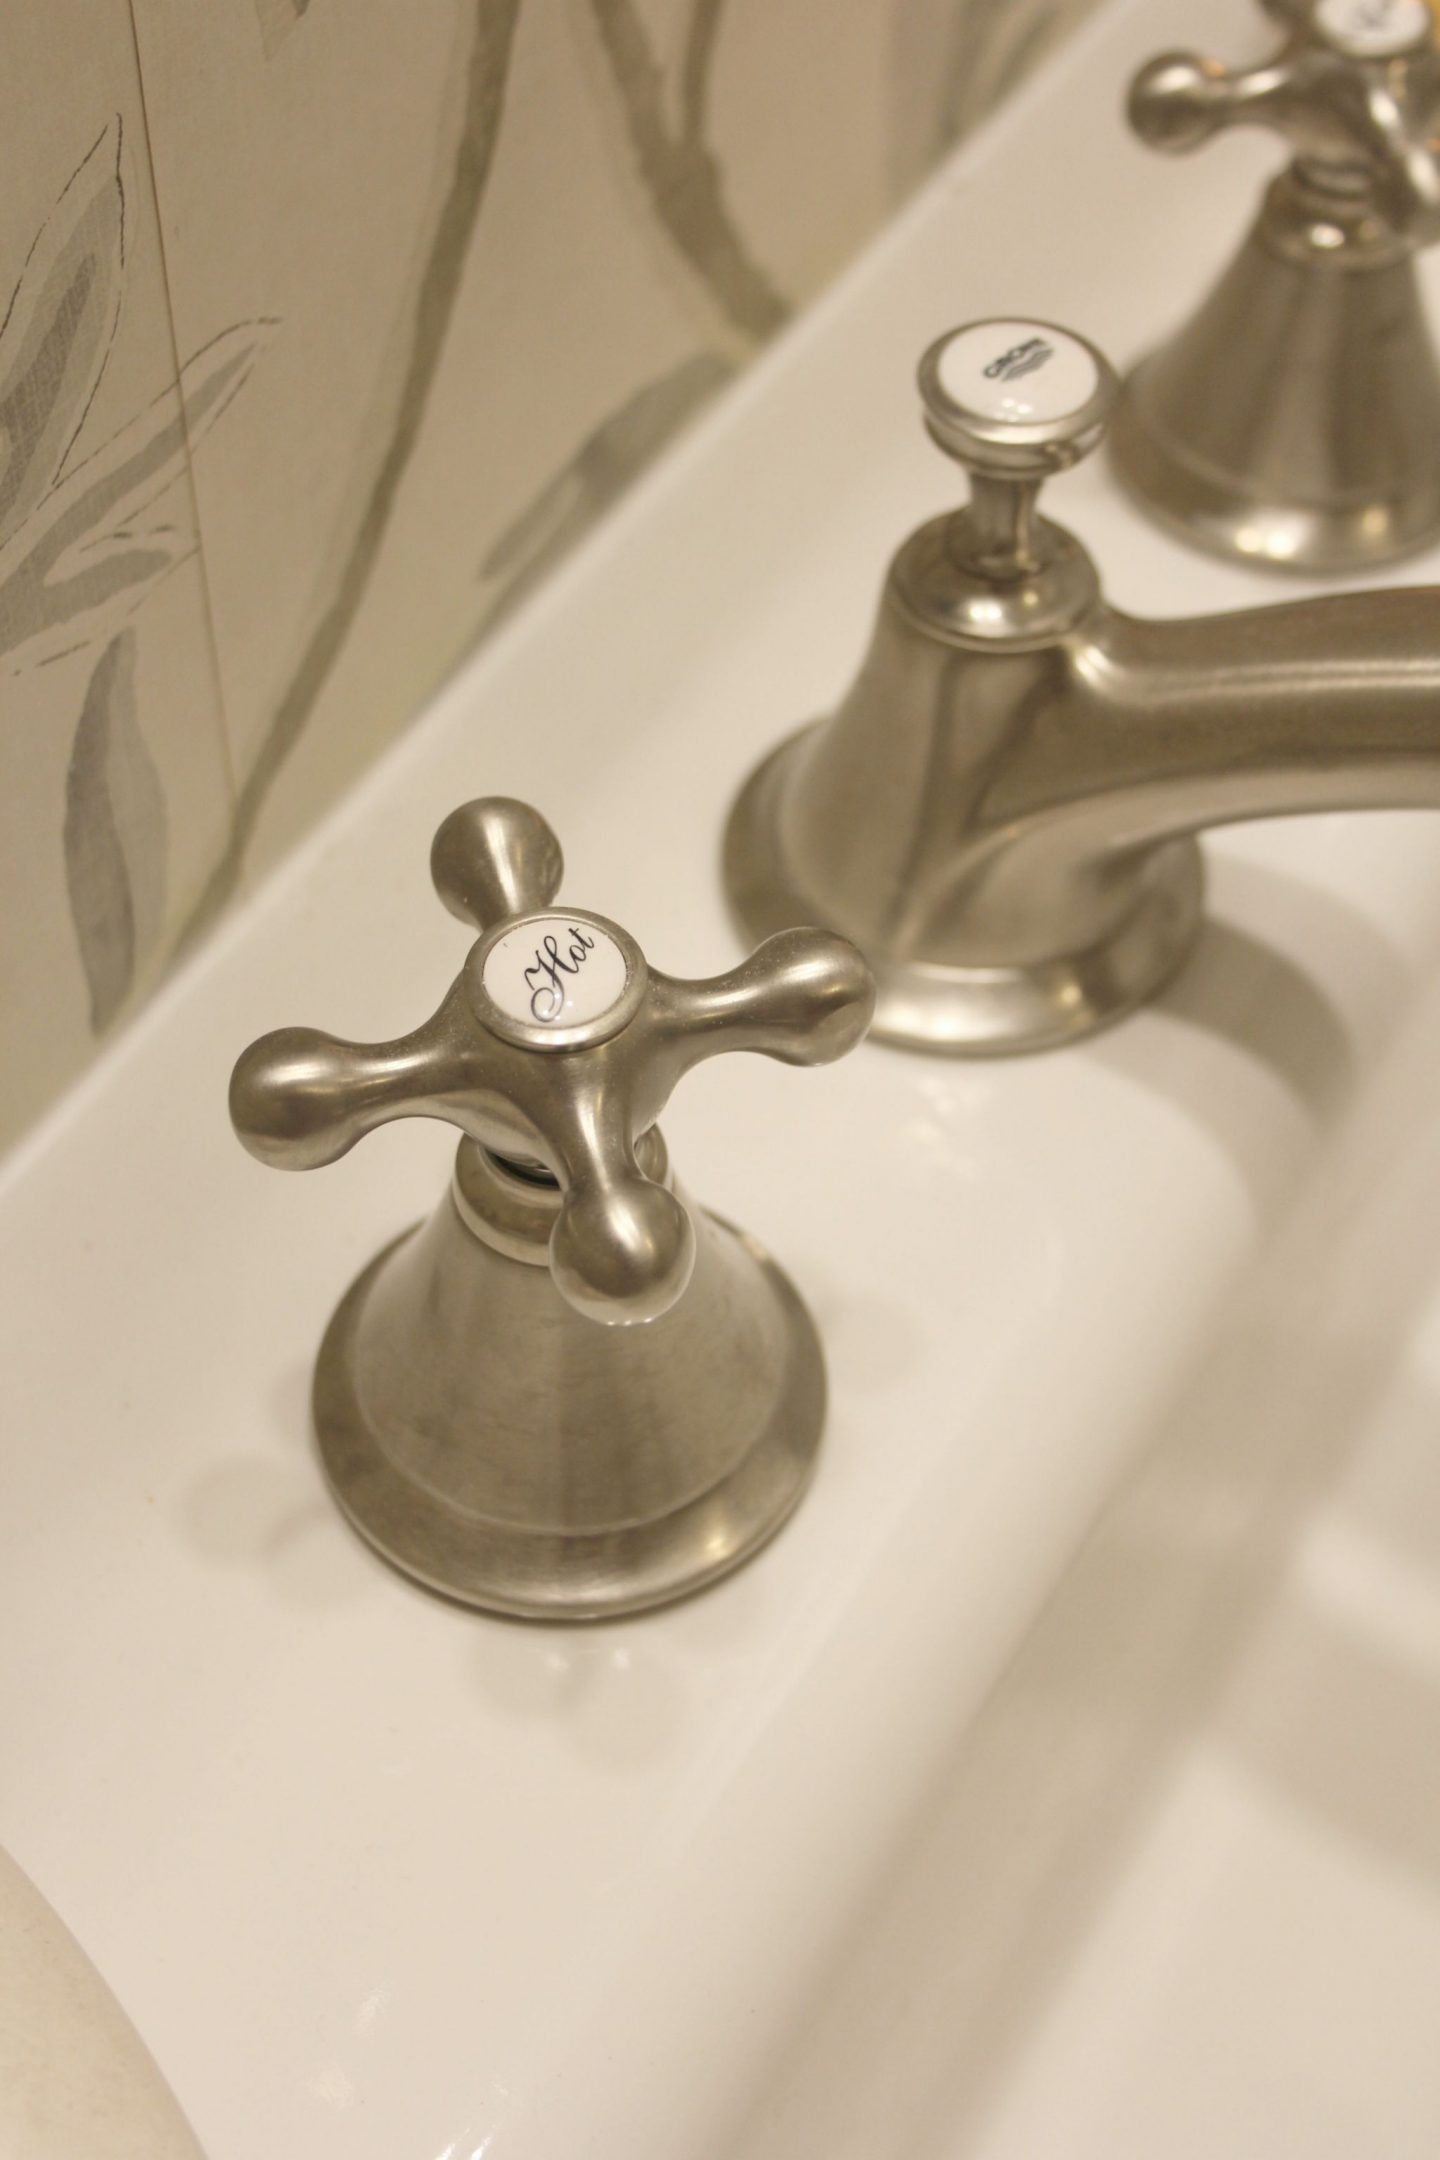 Detail of the brushed nickel widespread Seabury bathroom faucet by Grohe with cross handles. Its classic design is perfect for a timeless classic bathroom by Hello Lovely Studio!